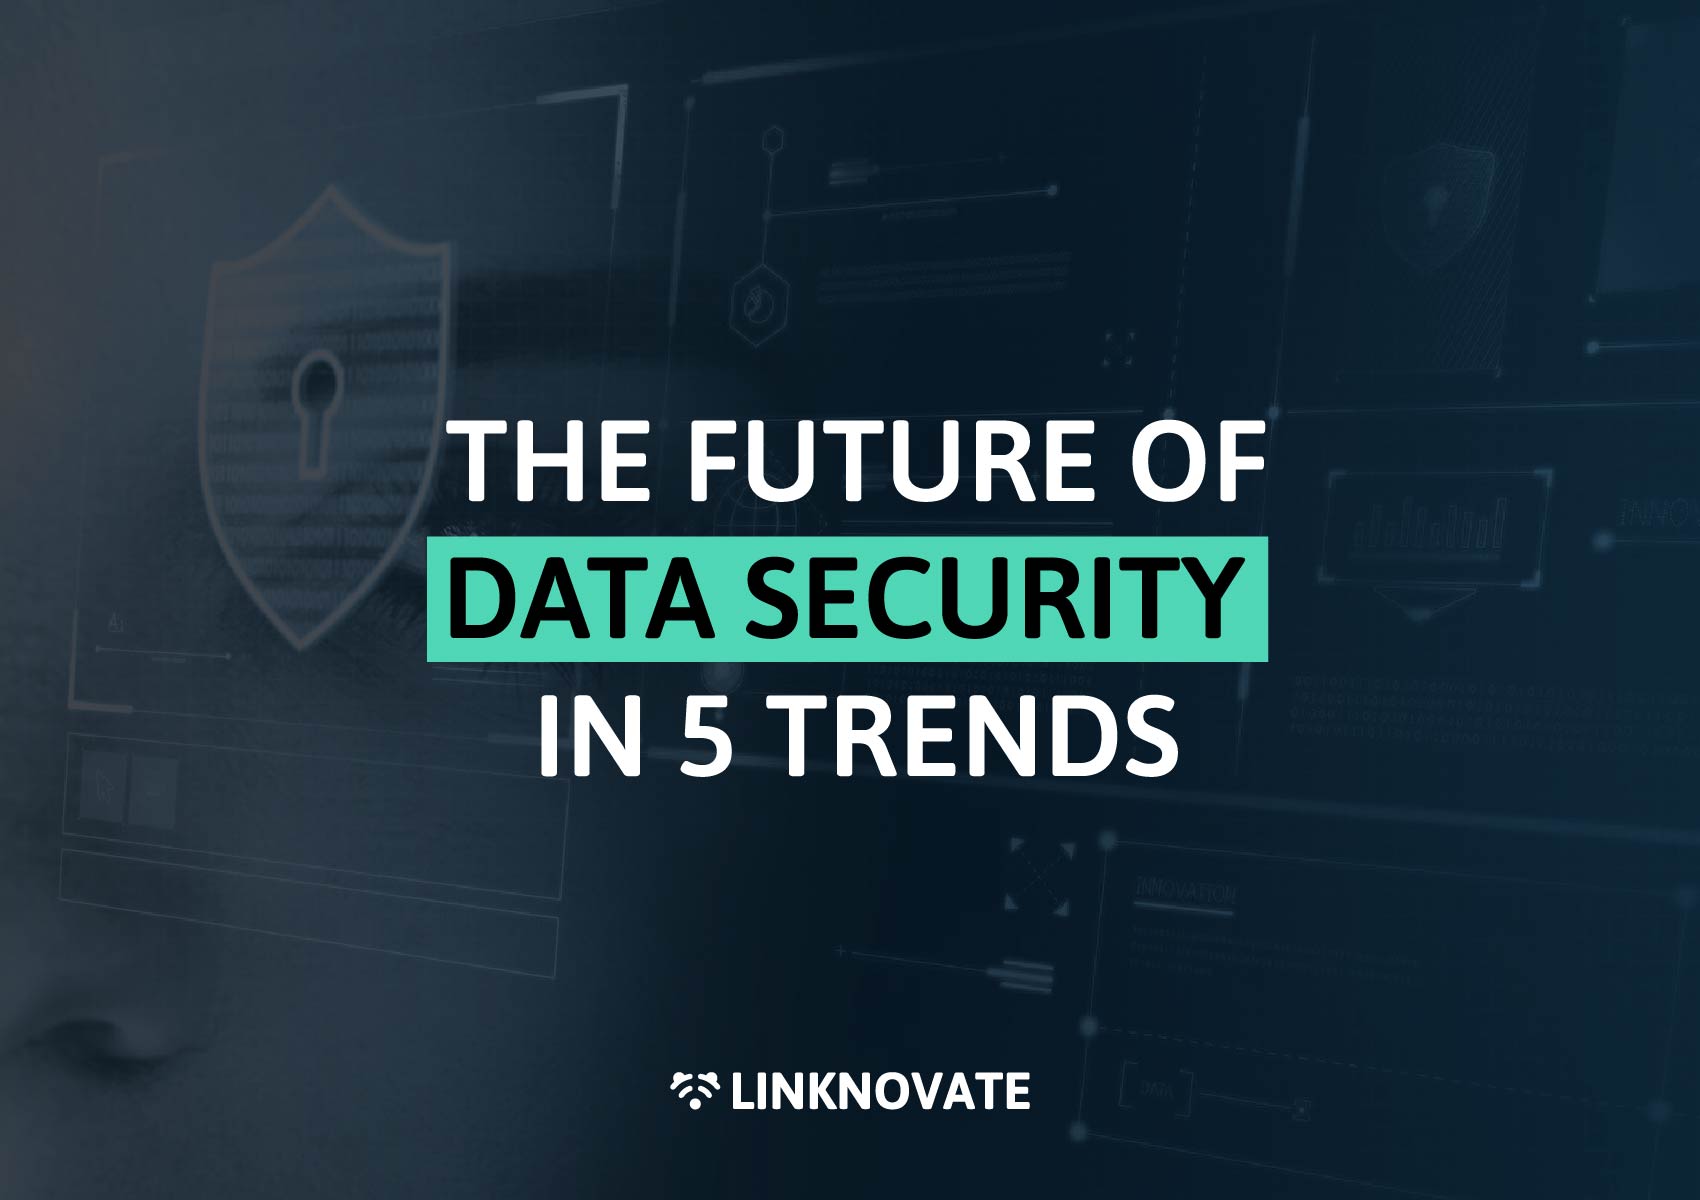 The future of data security in 5 trends